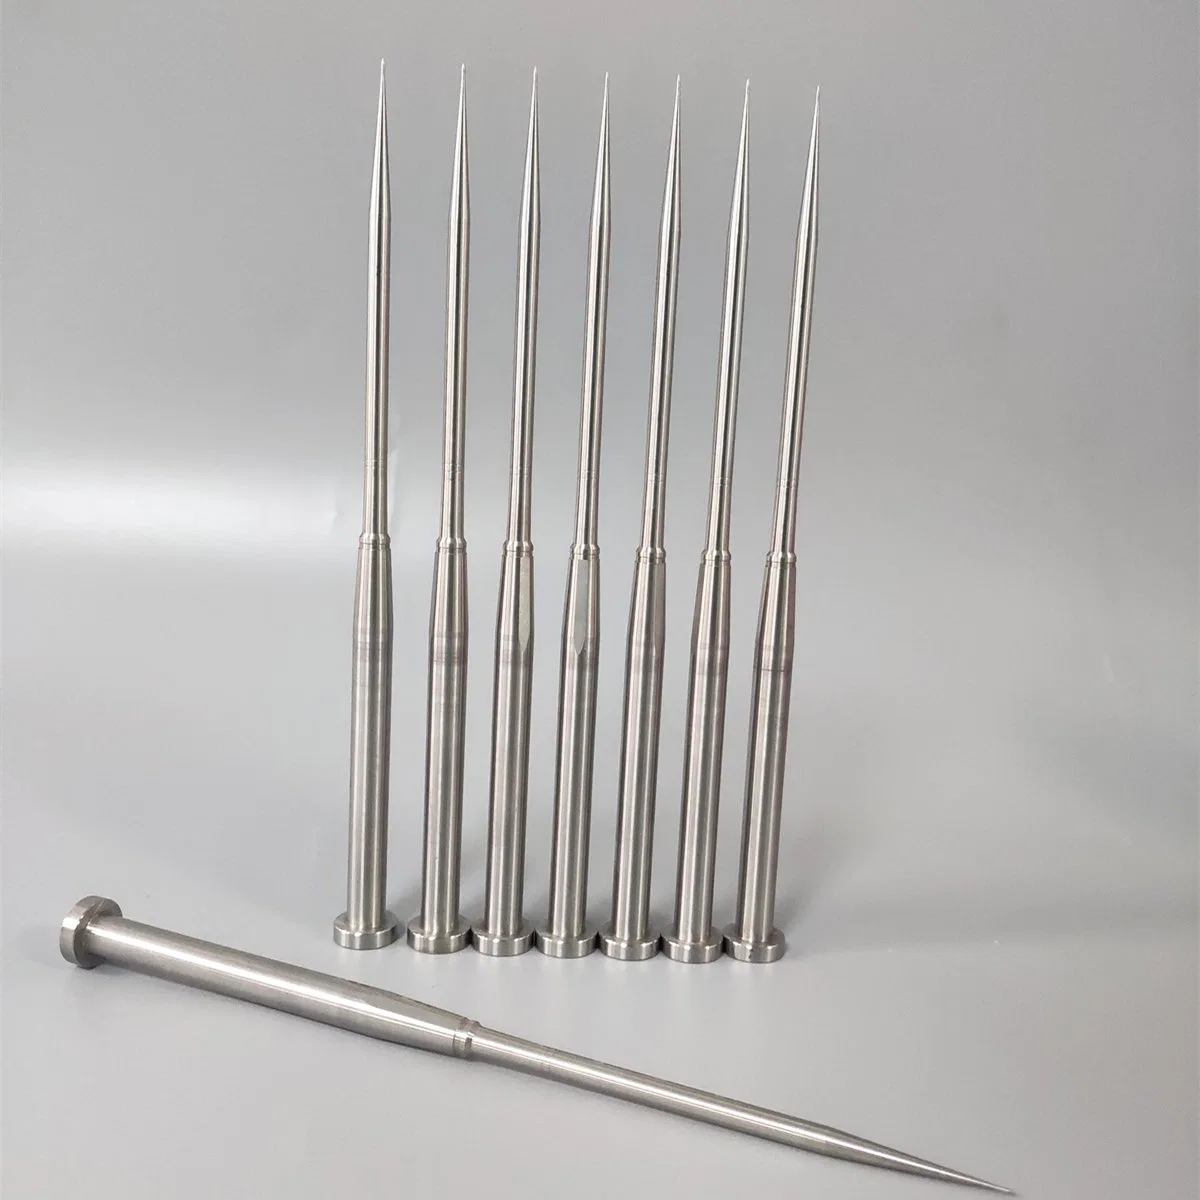 Non Standard Mold Core Pins Ejector Insert Pins for Injection Mould